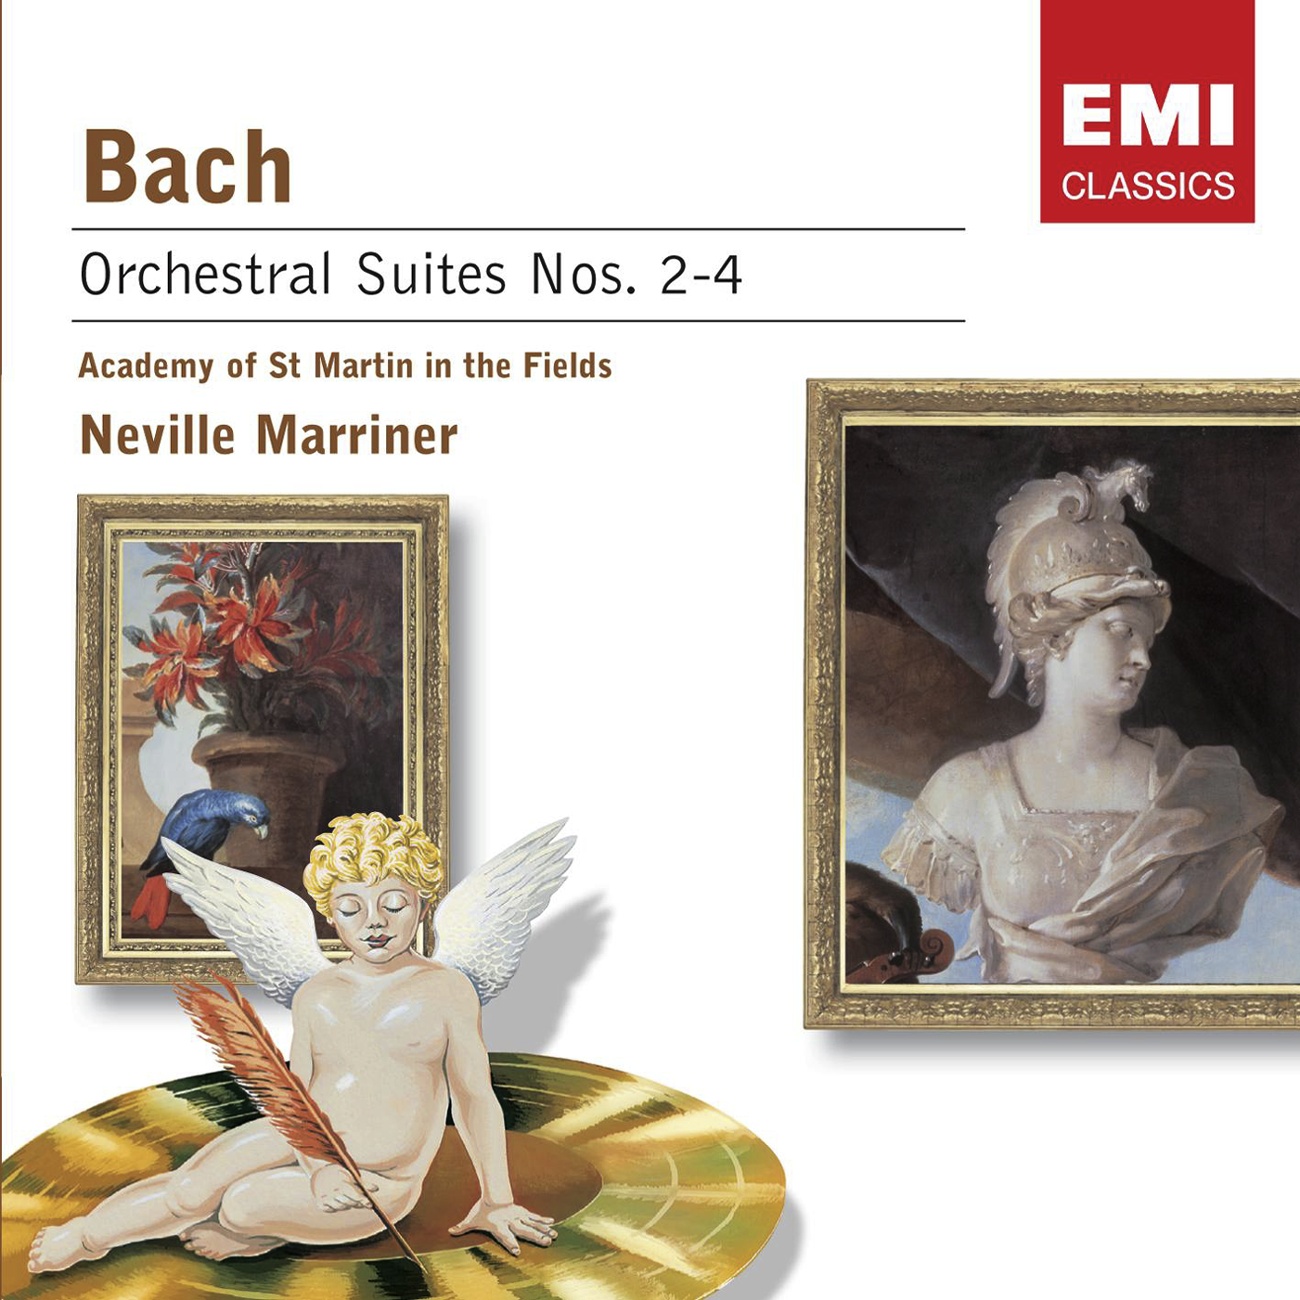 4 Orchestral Suites, BWV 10669, Suite No. 2 in B Minor, BWV 1067 flute and strings: Bourre es I  II